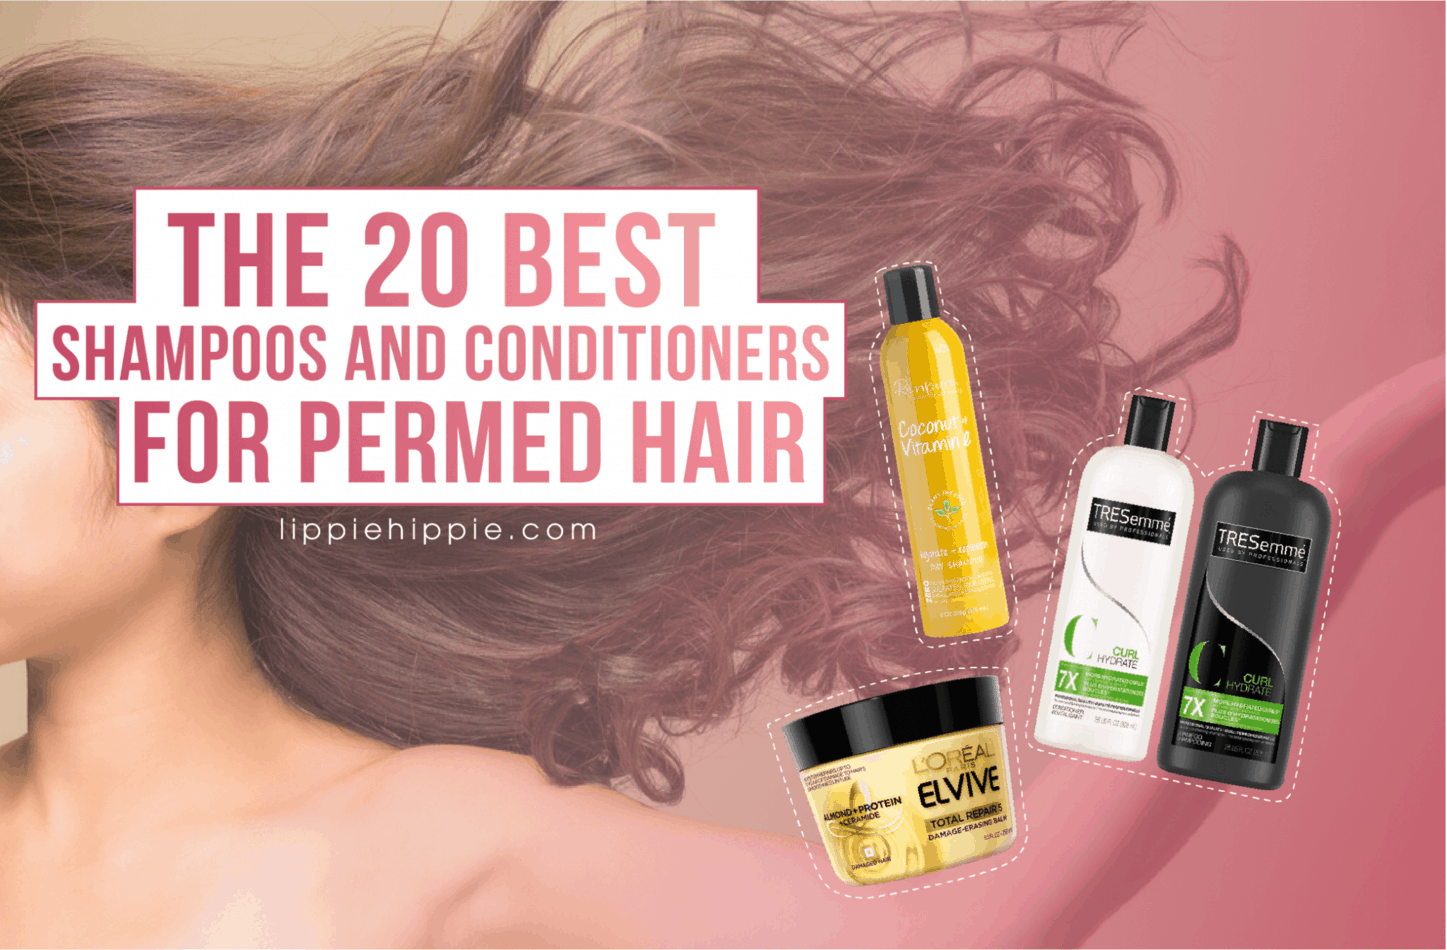 4. "The Best Shampoos and Conditioners for Platinum Blonde Hair" - wide 5